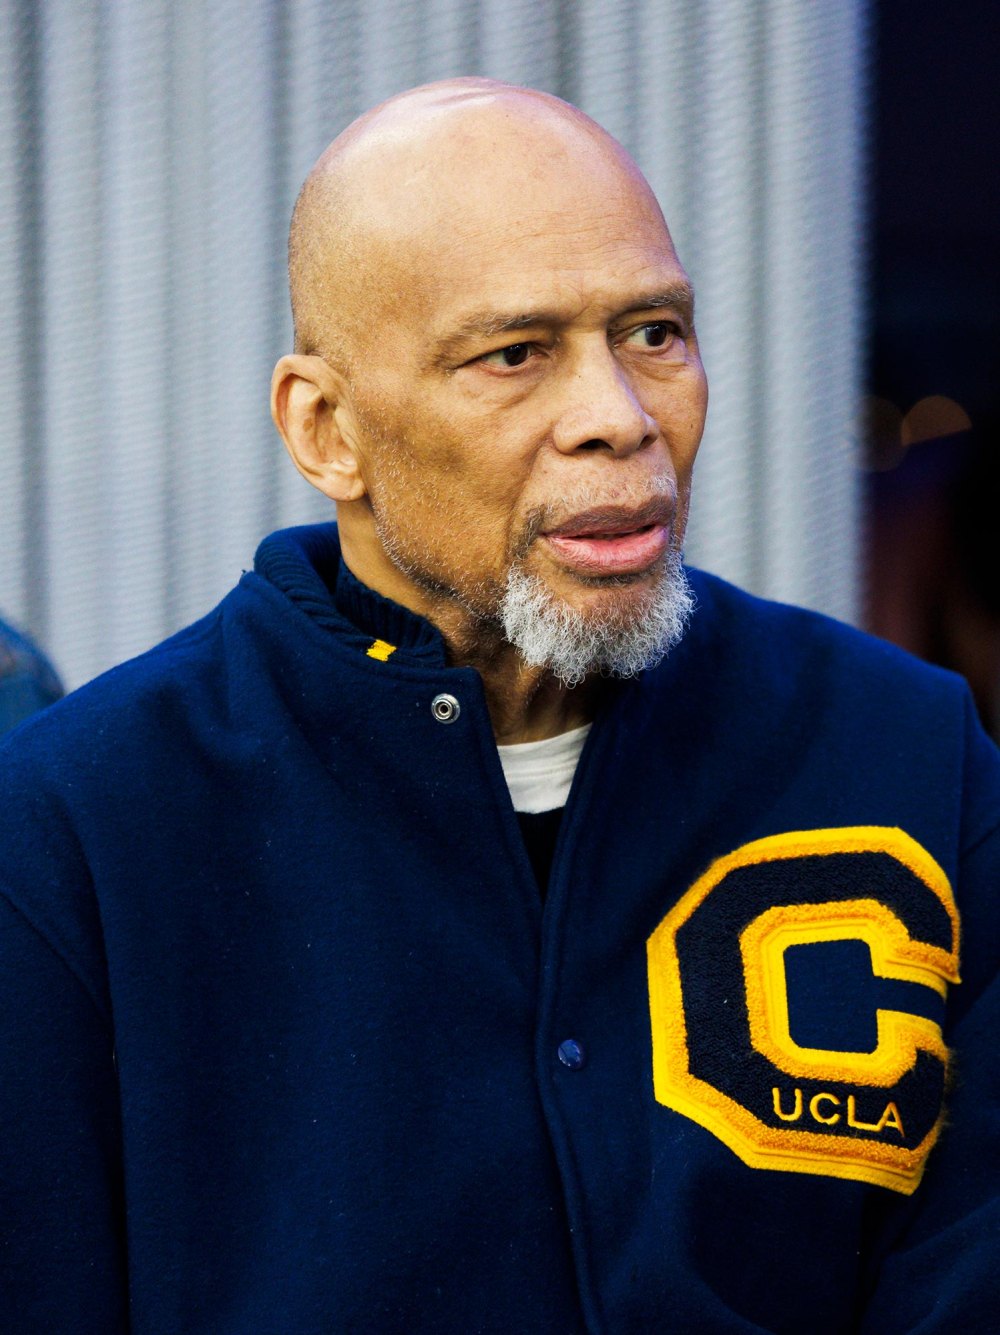 Los Angeles Lakers legend Kareem Abdul-Jabbar suffers hip fracture from accidental fall